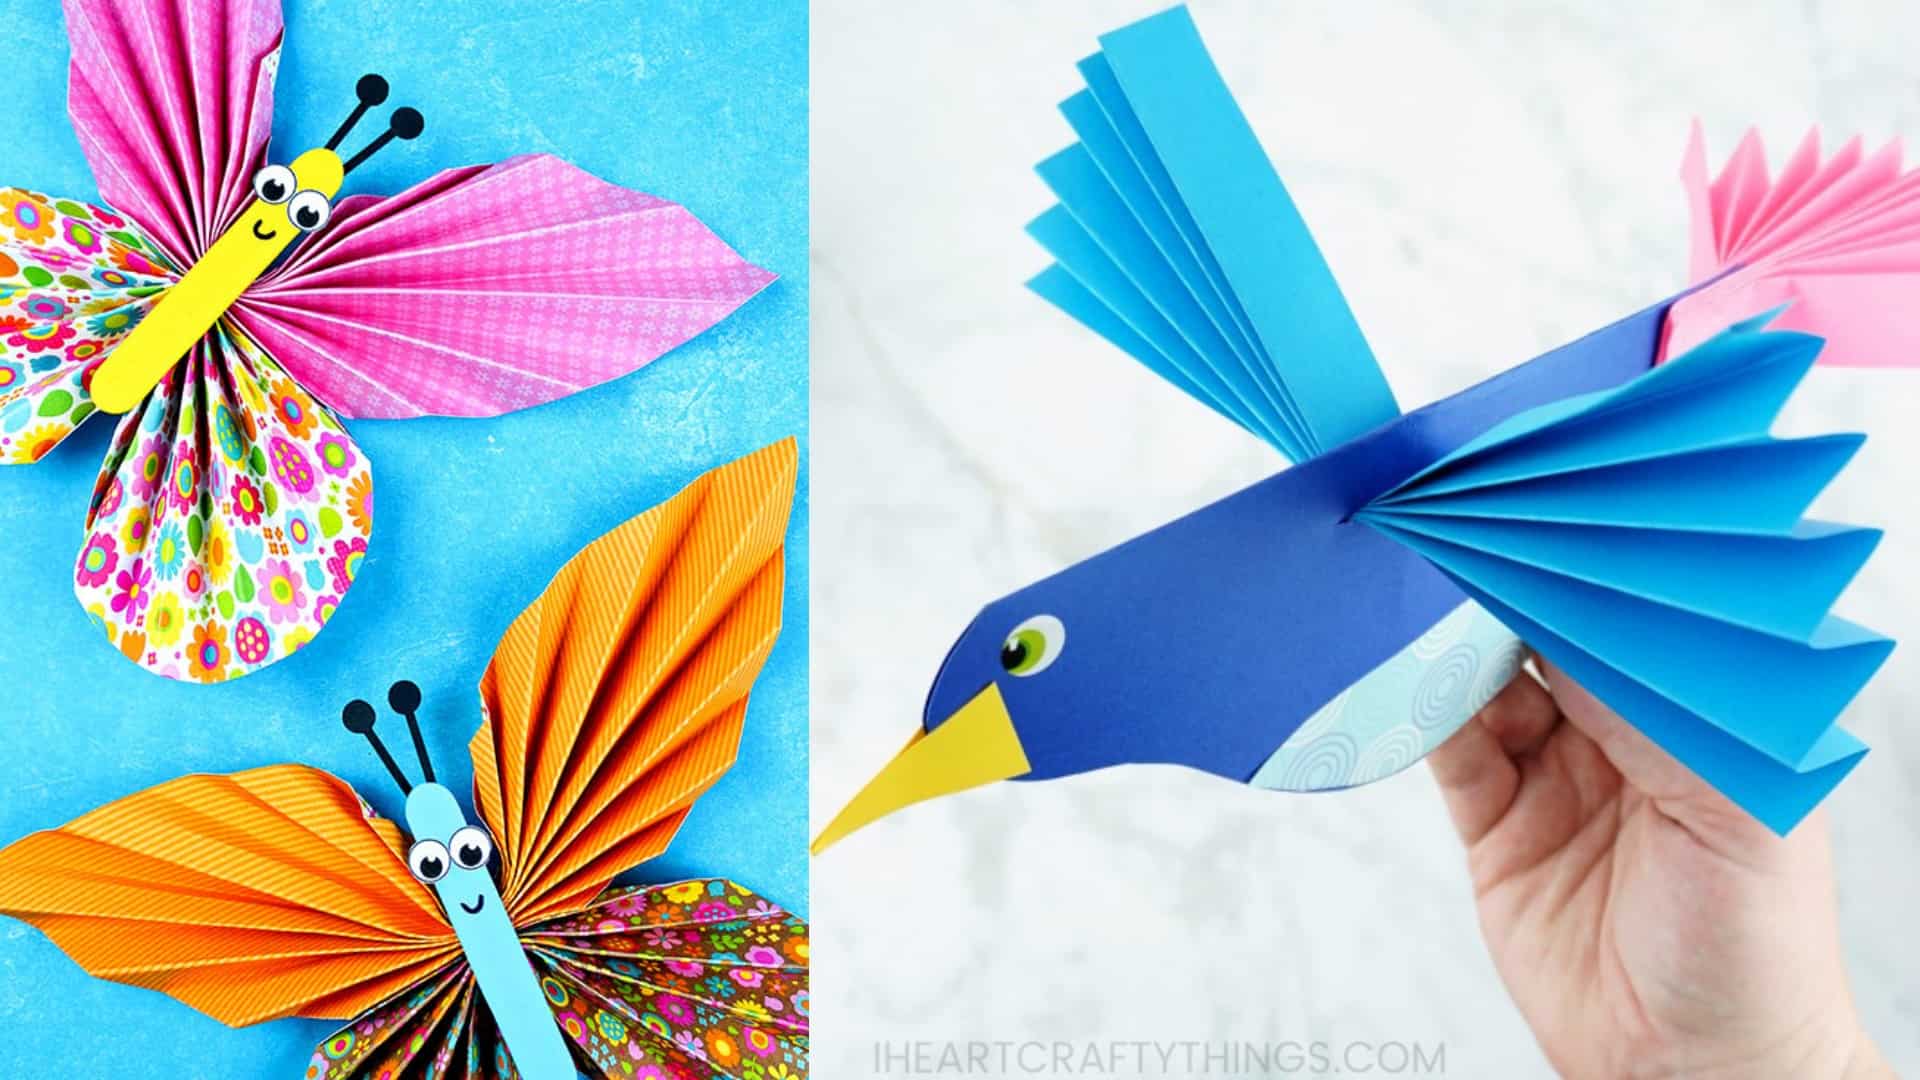 Super Cute Paper Craft Ideas and Activities for Kids